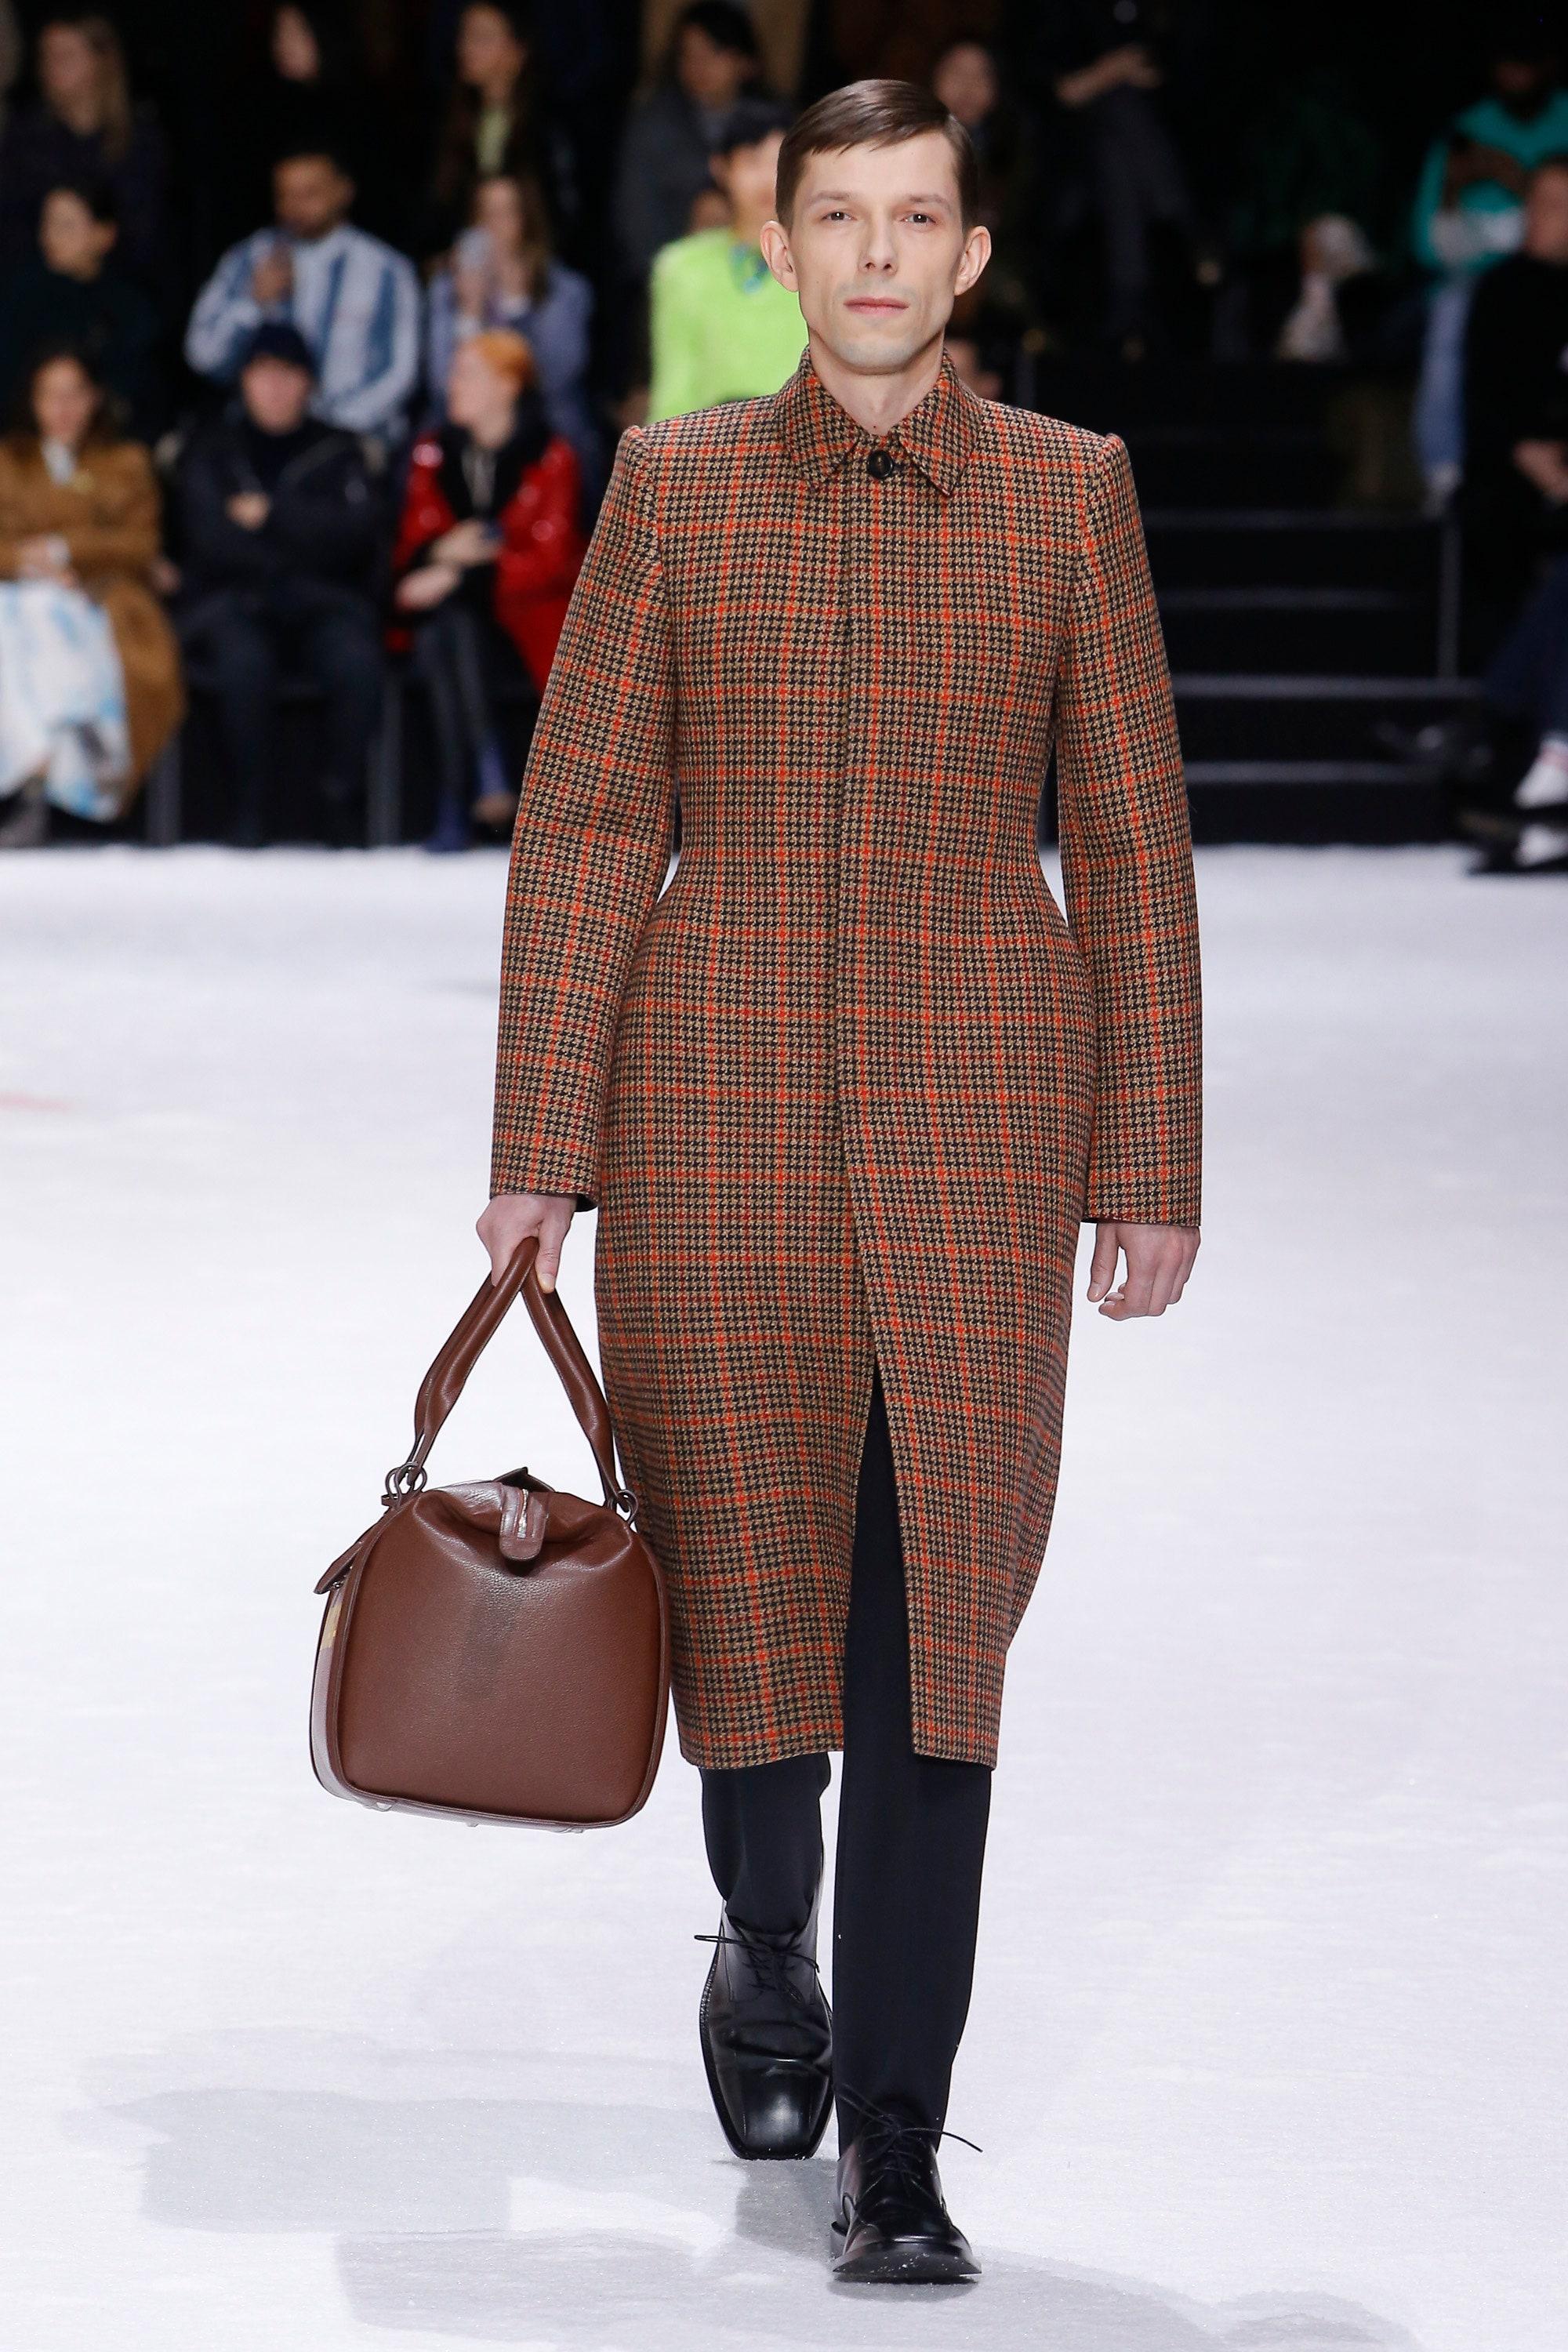 runway BALENCAIGA Demna 2019 Runway Hourglass brown check tweed coat IT44 XS 
Reference: TGAS/C00417 
Brand: Balenciaga 
Designer: Demna 
Collection: Fall Winter 2019 Runway 
Material: Wool 
Color: Brown 
Pattern: Check 
Closure: Button 
Extra